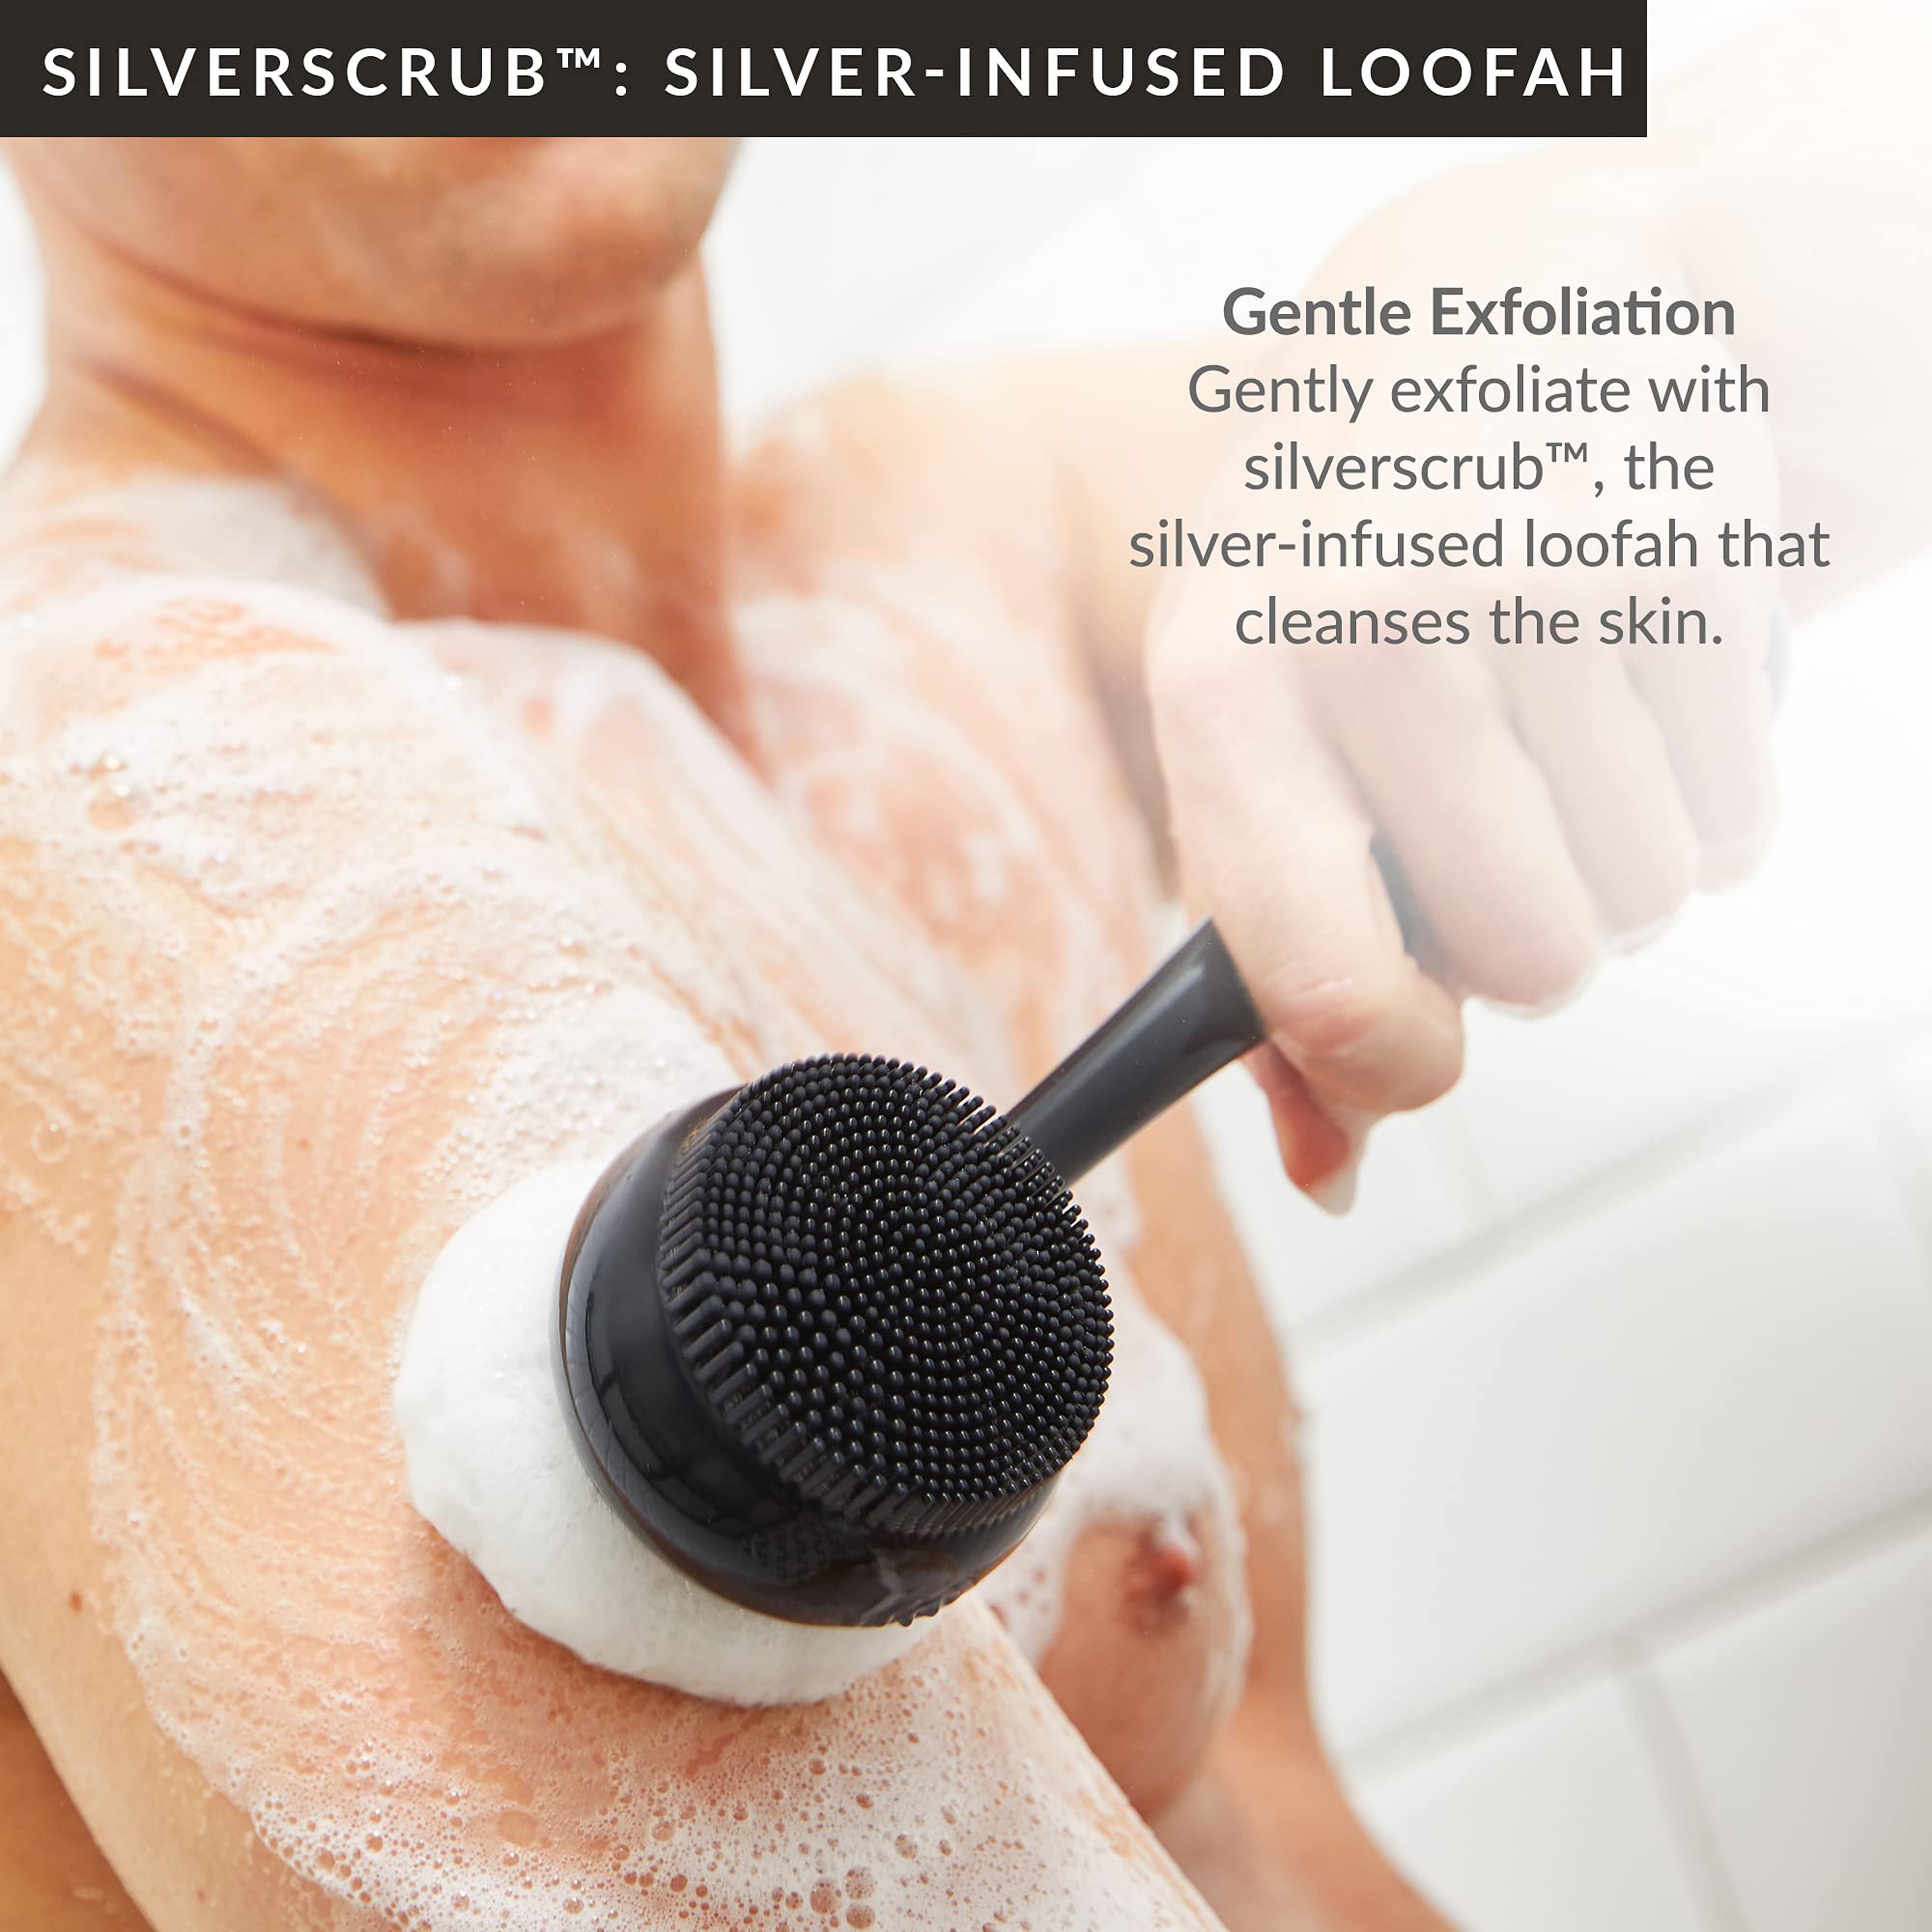 PMD Clean Body - Smart Body Cleansing Device with Silicone Brush & Three Interchangeable Attachments - Waterproof - SonicGlow Vibration - Cleanse, Exfoliate, & Massage Body